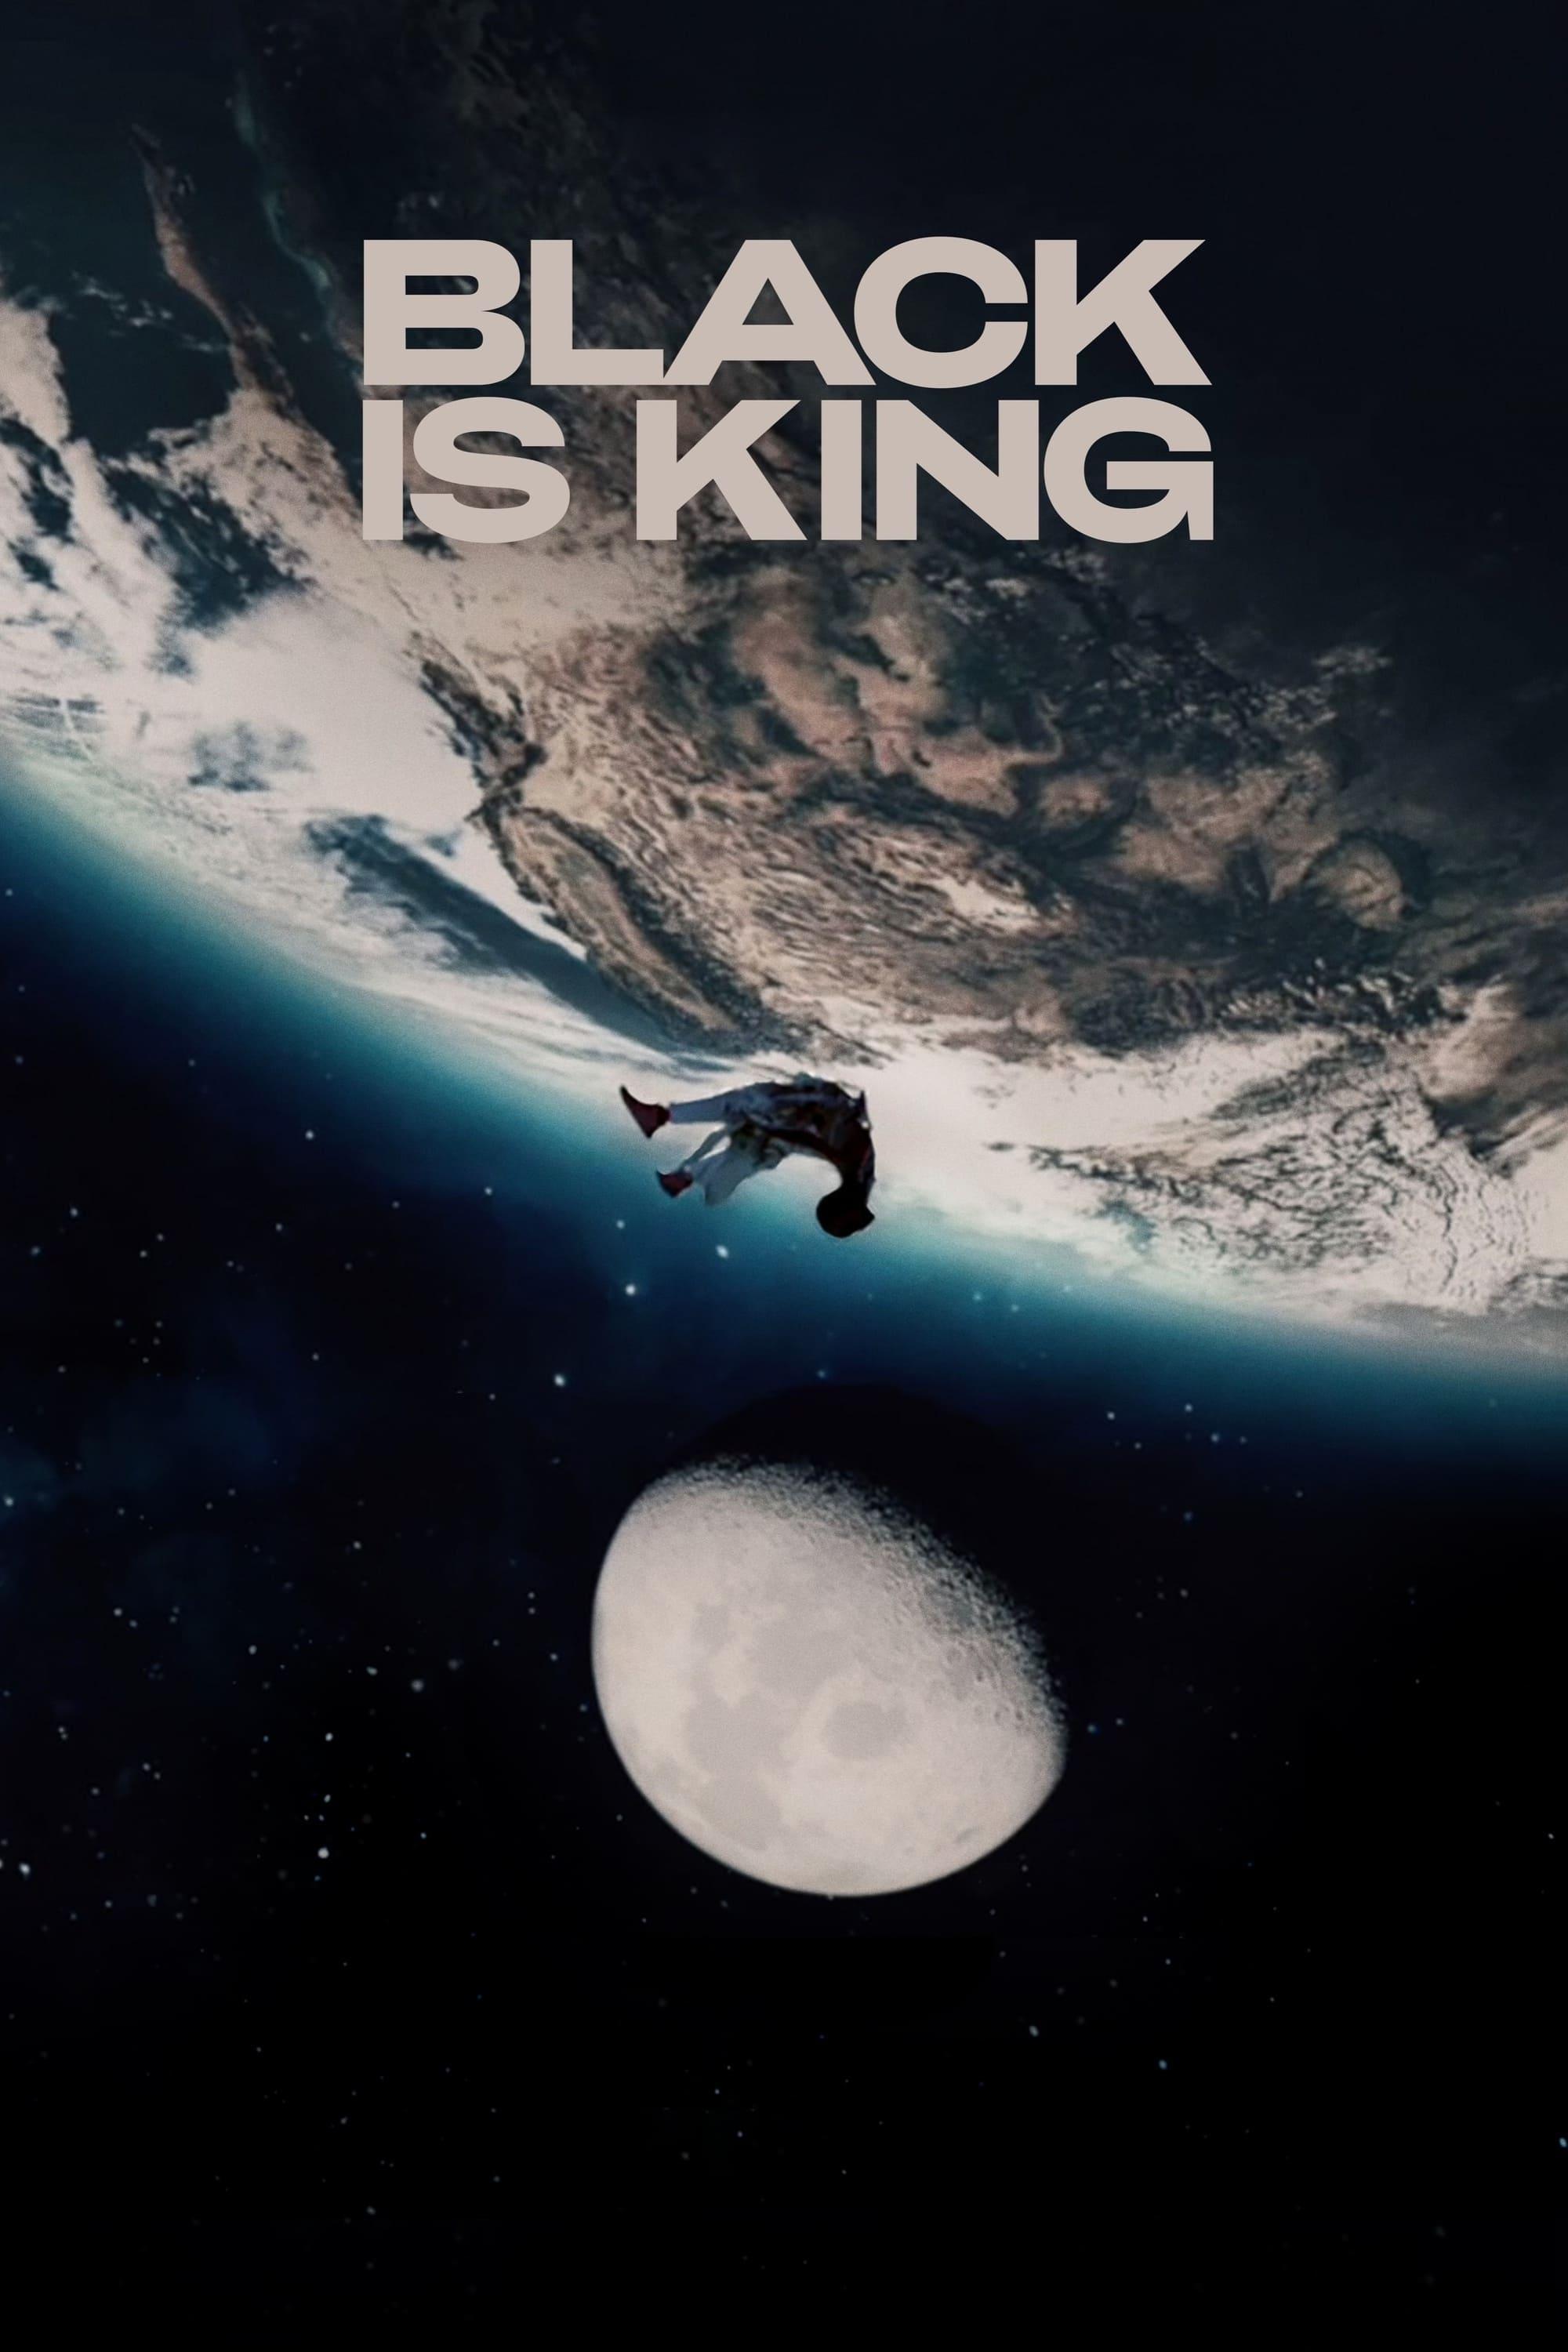 Black Is King poster